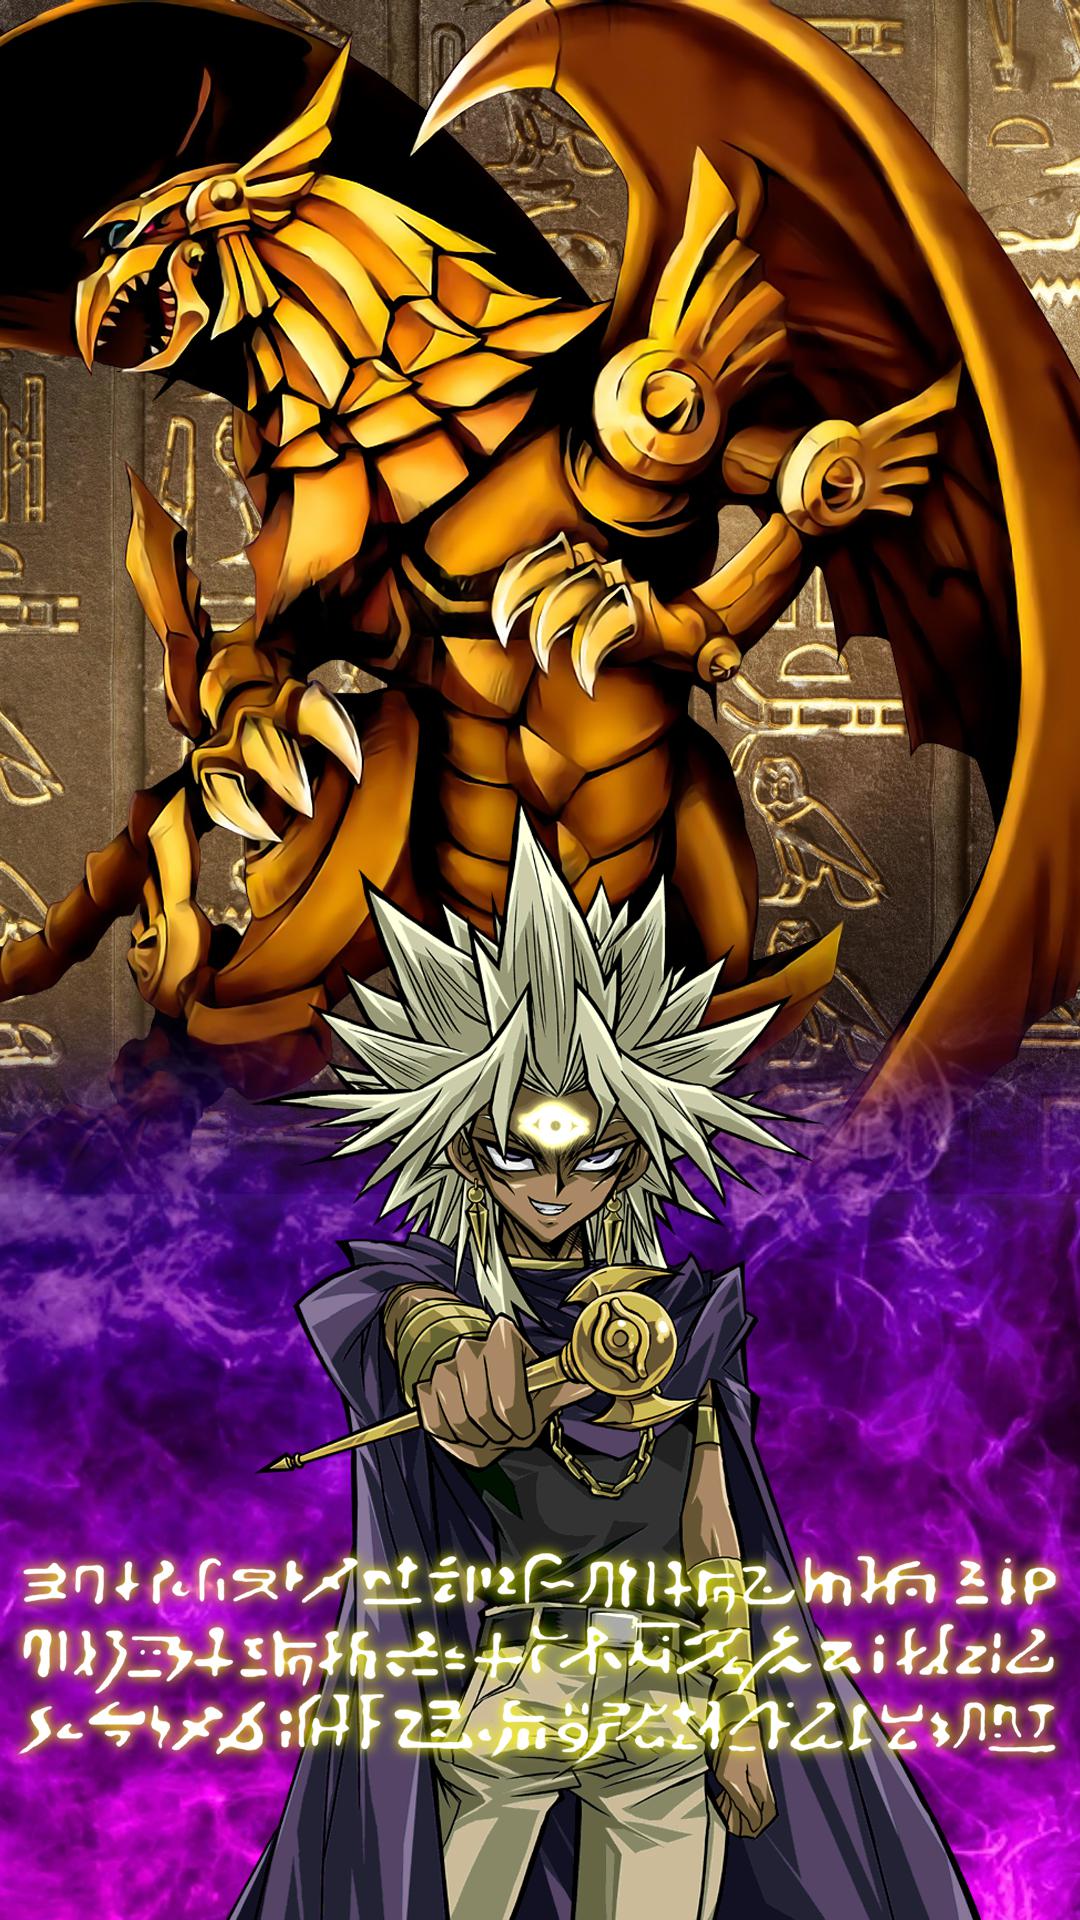 Marik and ra wallpaper with and without hieratic text ryugioh